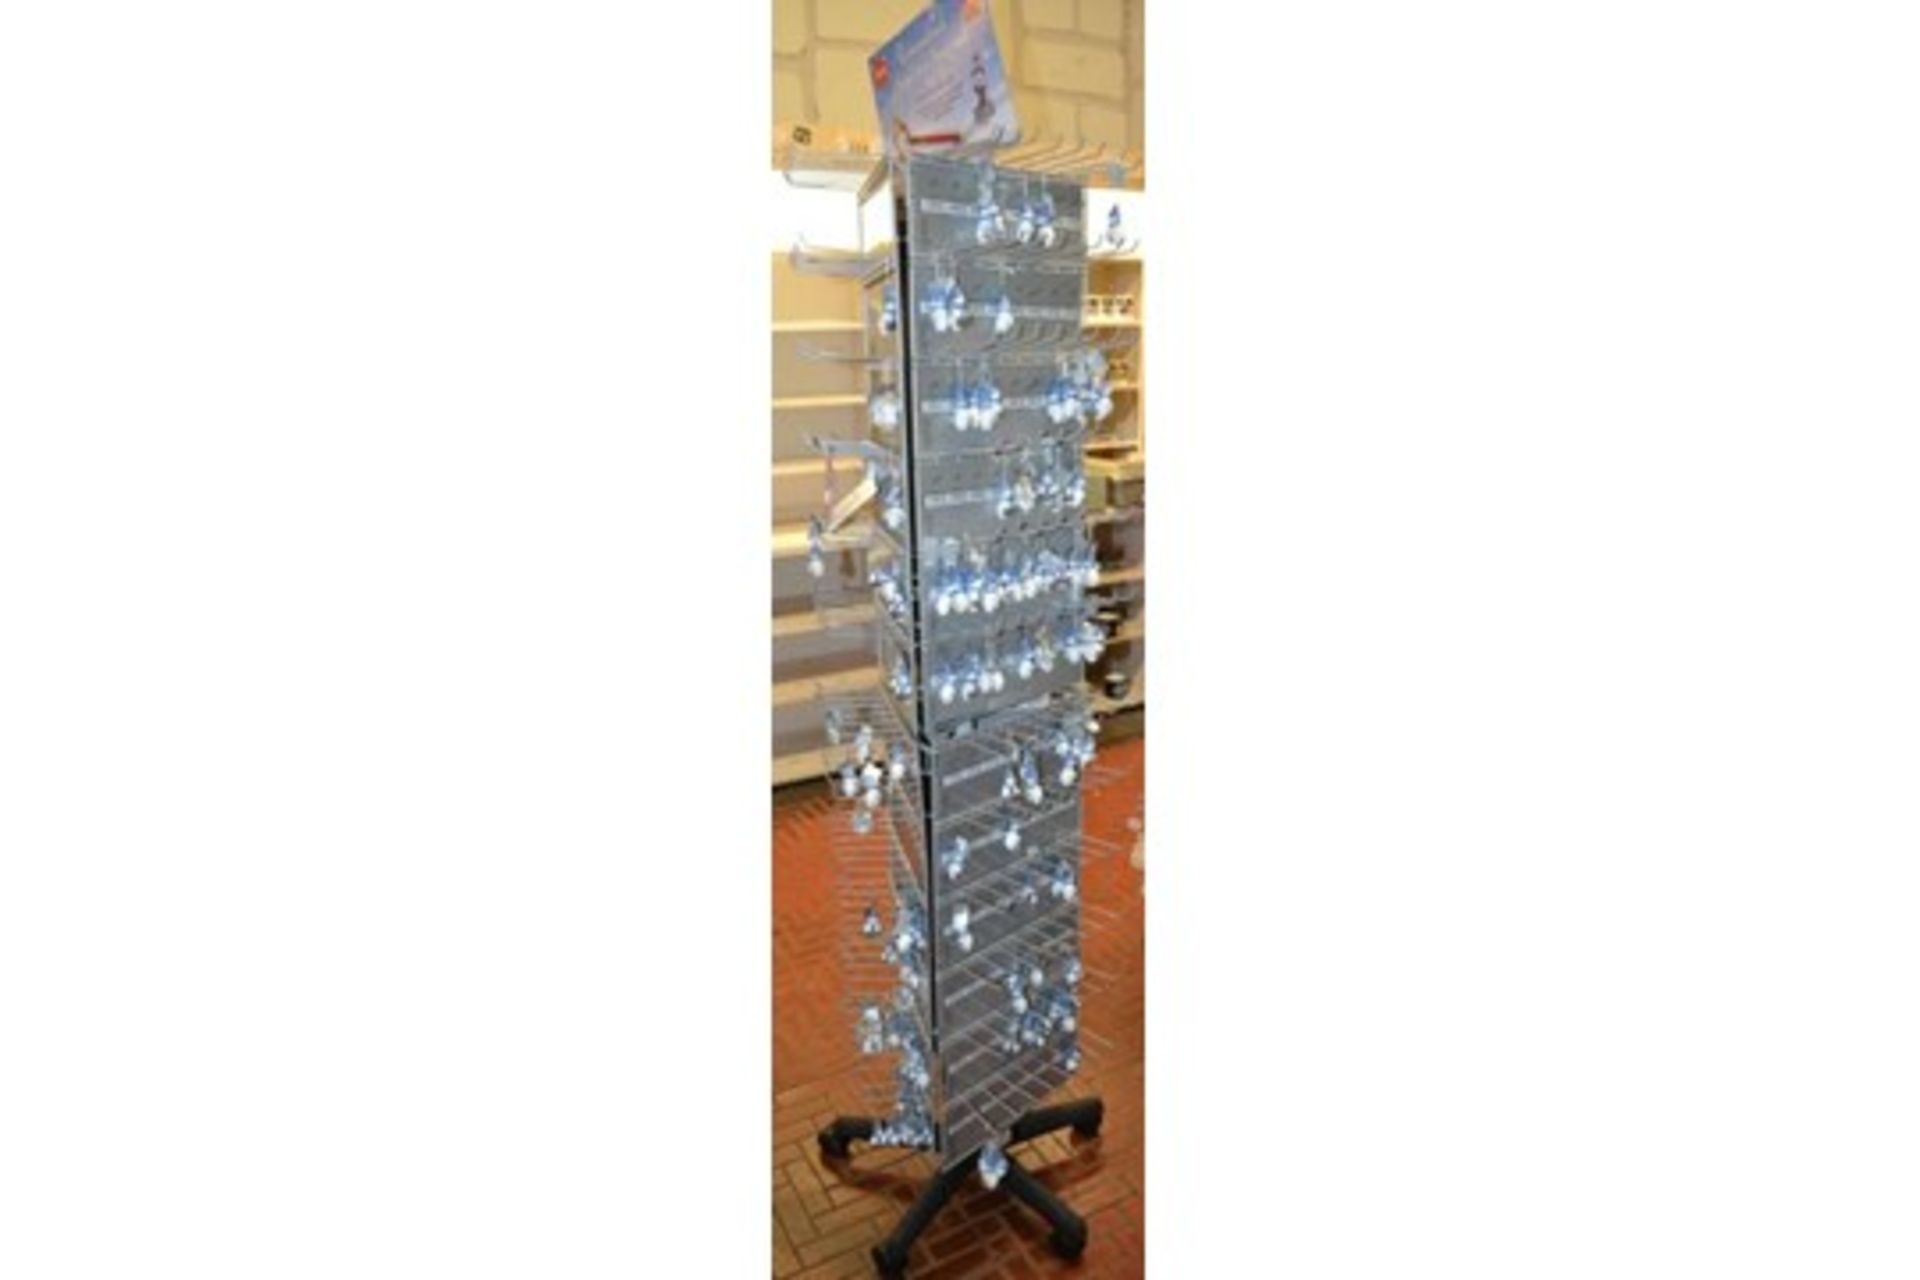 27 x Retail Carousel Display Stands With Approximately 2,800 Items of Resale Stock - Includes - Image 33 of 61